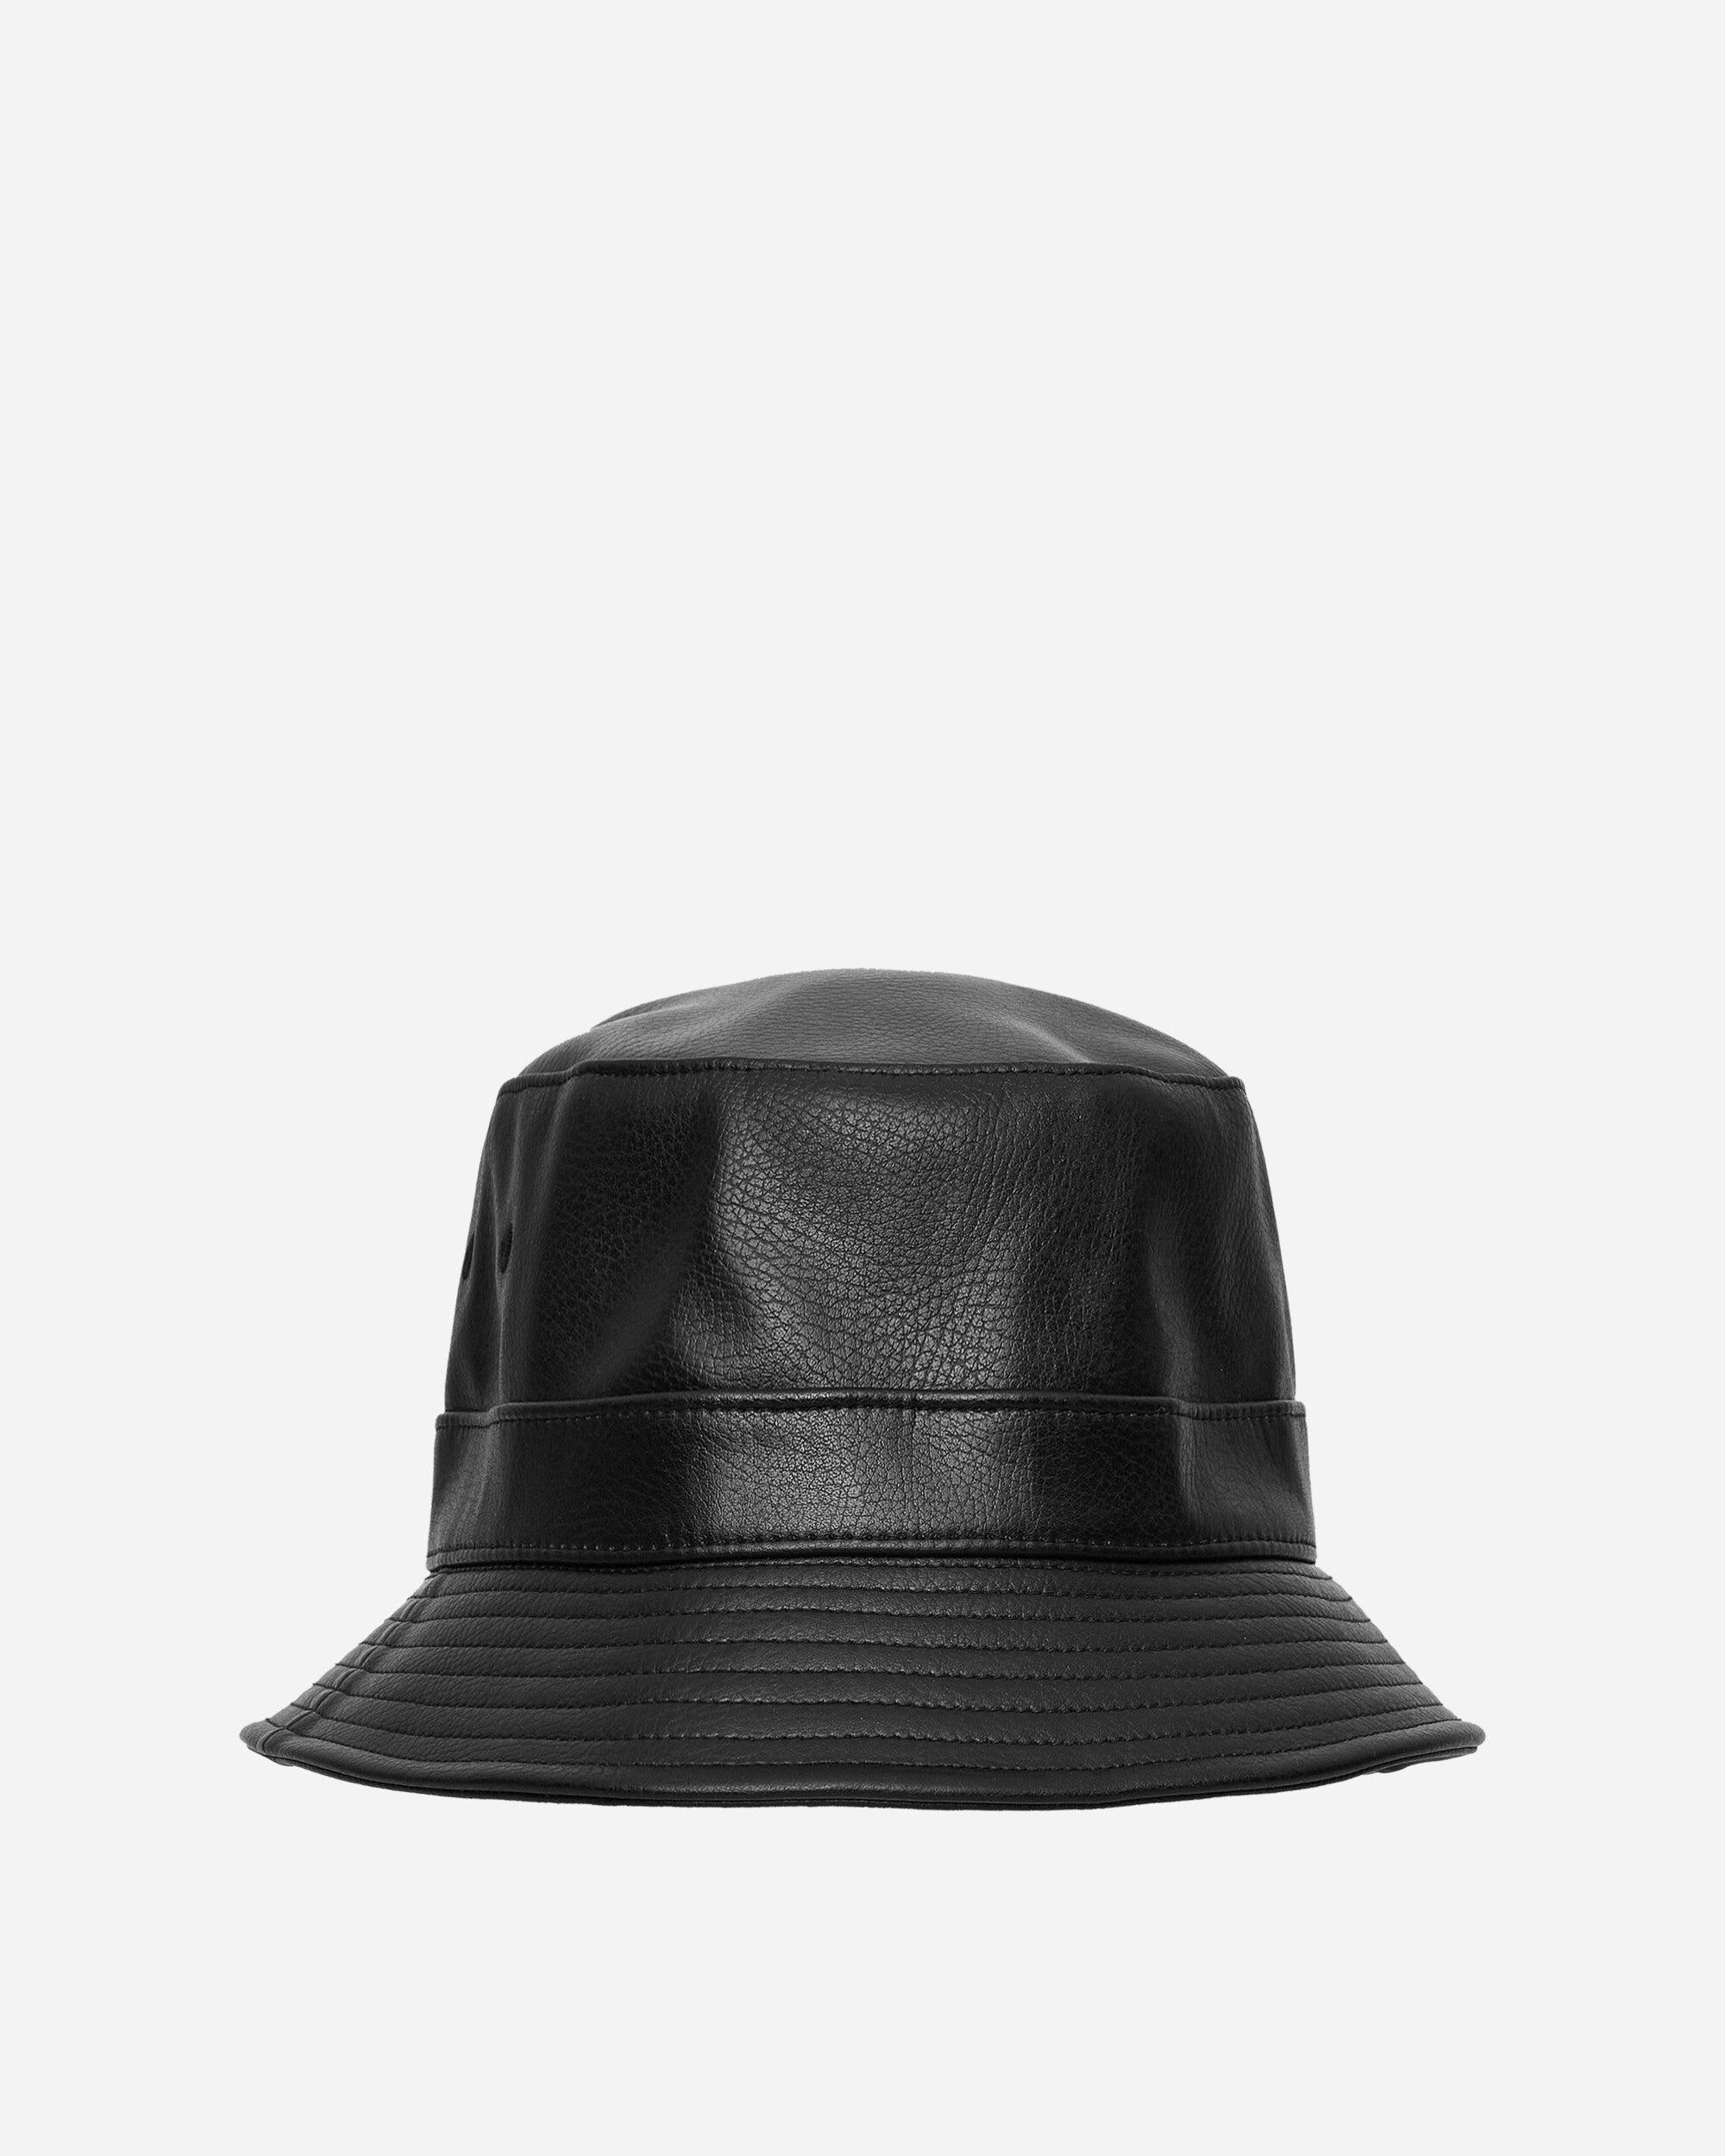 COLO定価以下 新品 WTAPS BUCKET 03 HAT SYNTHETIC M - ハット